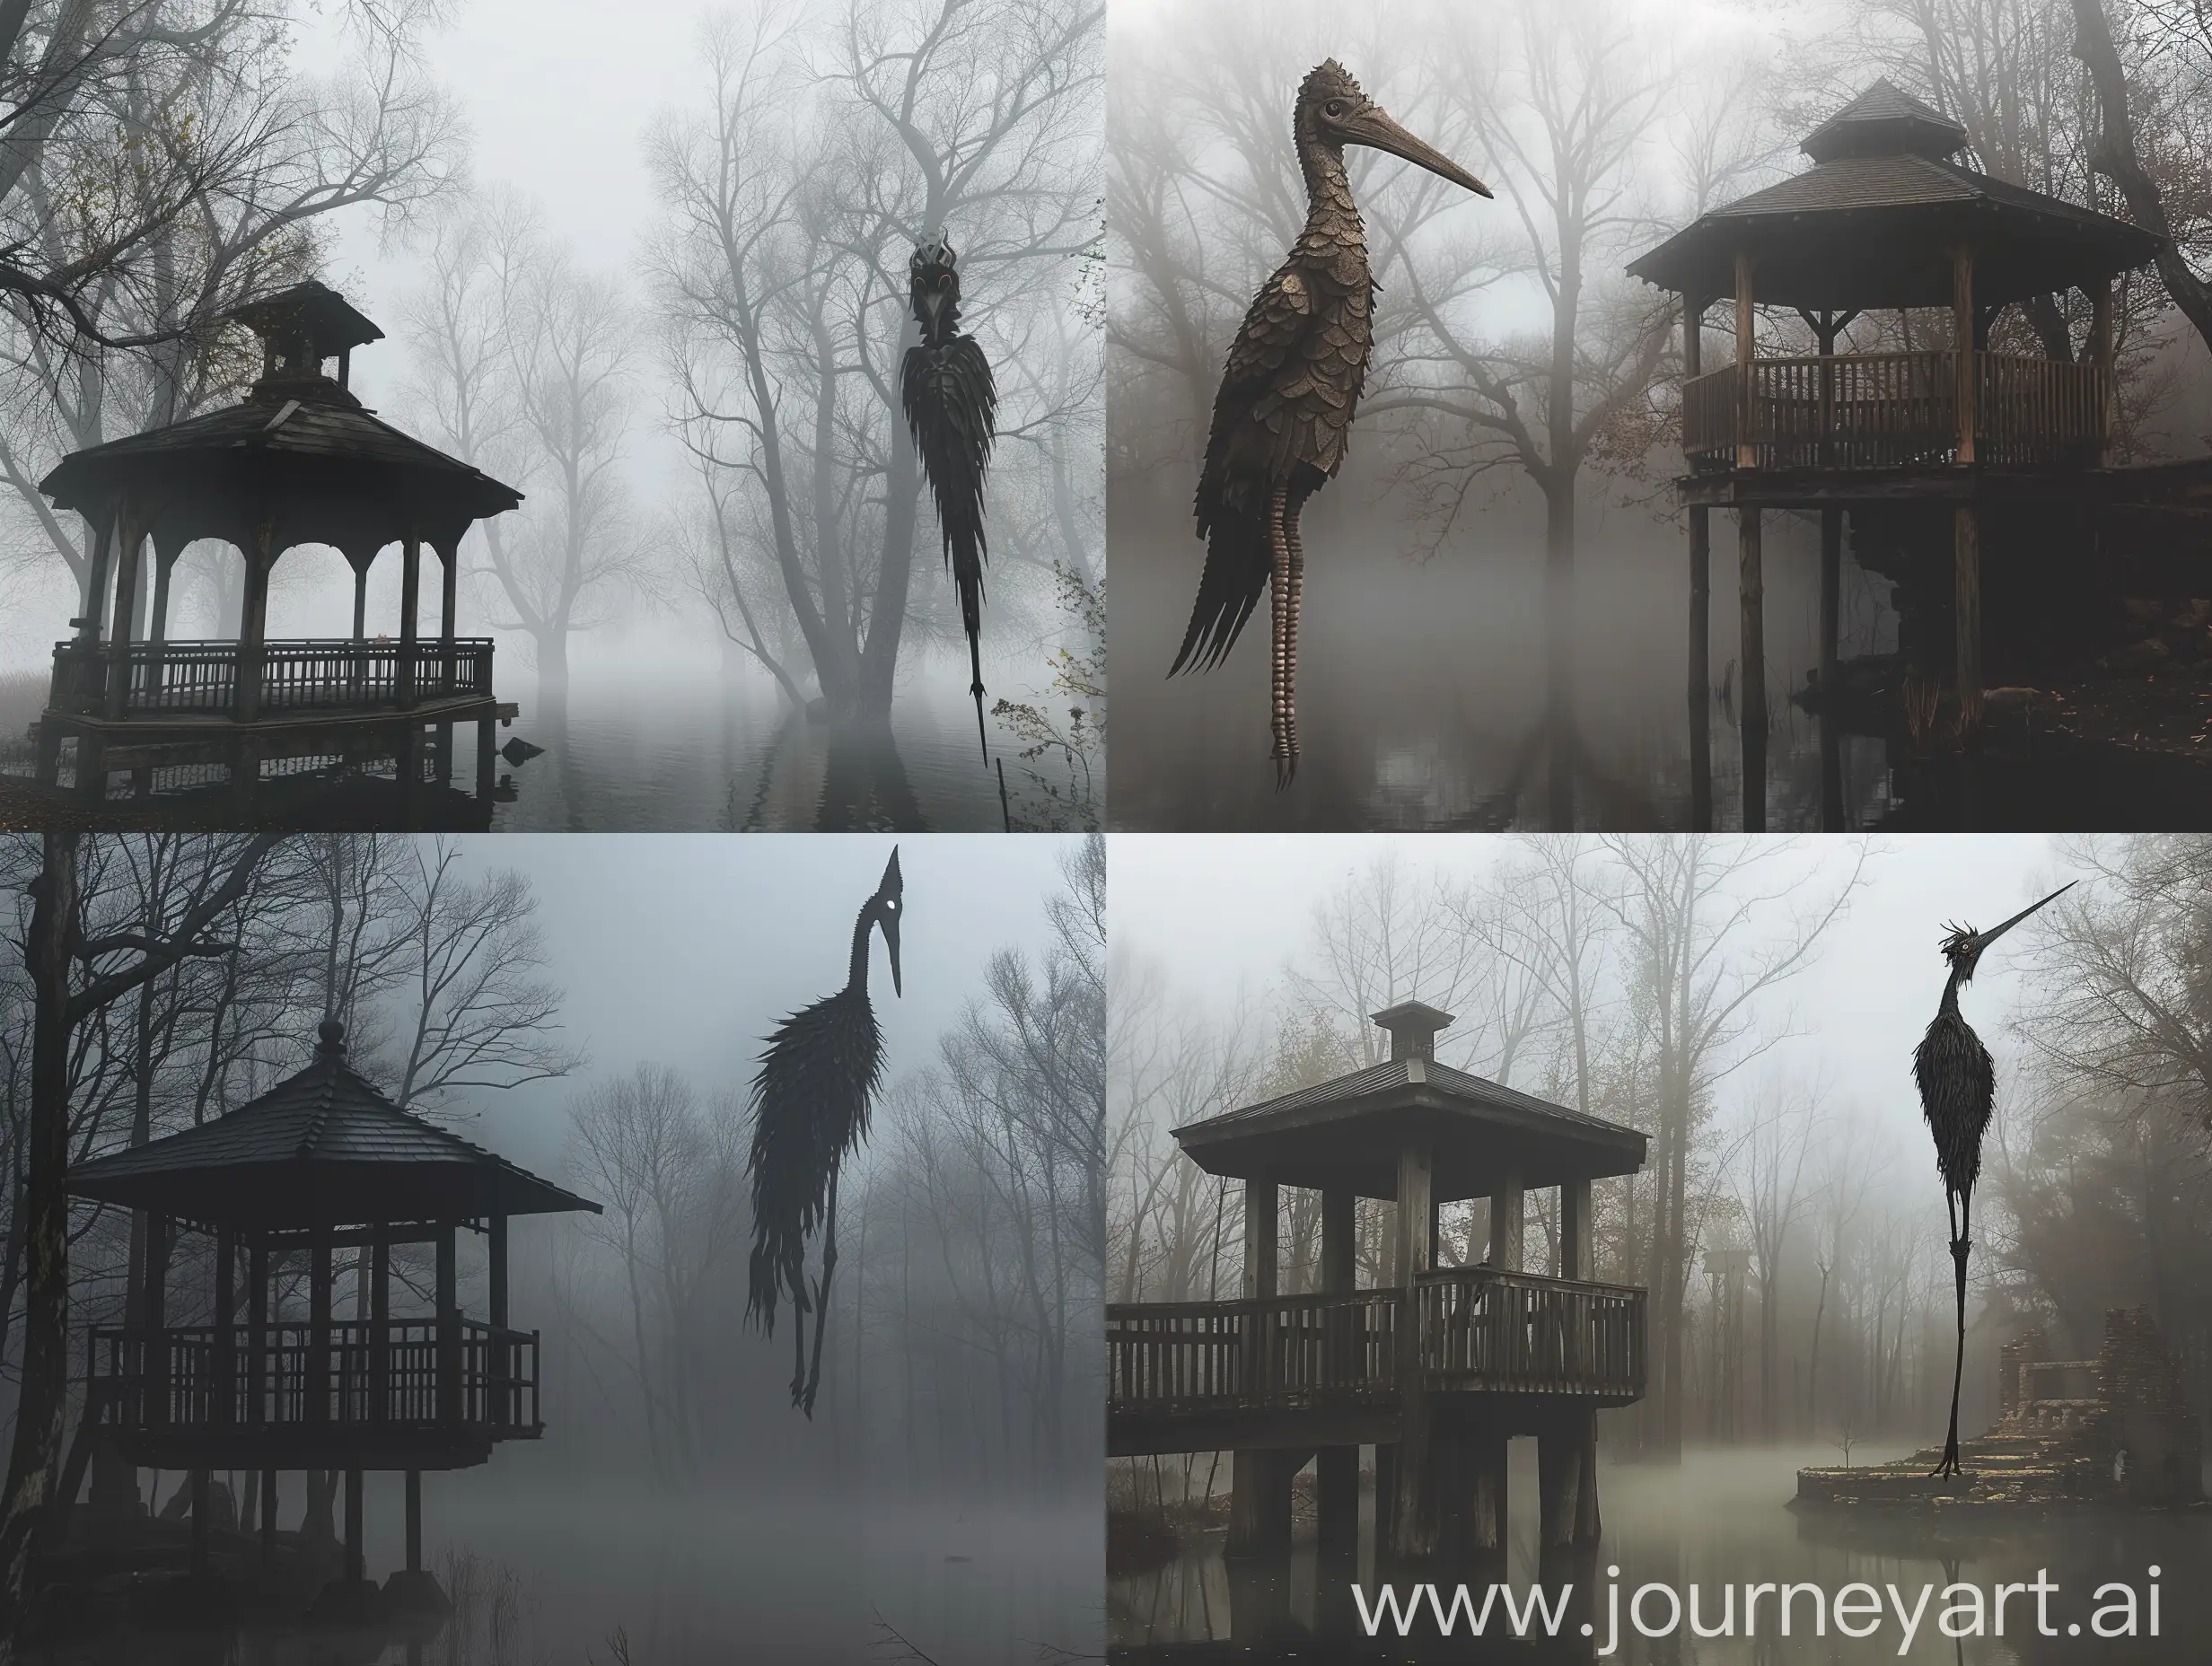 cinematic, realism, Using (((imagination))) to craft a photorealistic representation of an unusual fantasy dream, Cinematic shooting techniques and shooting angles, use wide-angle lens, long-shot, top-shot. photorealistic representation of an unusual fantasy dream, Describing yokai ((( A dark and unsettling scene envelops a fog-enshrouded forest where a tall, slender creature with human-like facial features poised amidst the misty woods. It stands sentinel on elongated, bird-like legs with a body sheathed in feathers. A diminutive wooden structure reminiscent of a gazebo or pavilion hovers over the serene surface of a pond or lake. Trees in the vicinity are bare or sparsely leaved, hinting at autumnal or wintry conditions. The entire atmosphere of the image is shrouded in mystery and a somber chill, accentuated by the fog and the muted palette of colors))), Amazing, shocking, Mysterious, Contrasty, ivory colors, Memphis, The image should capture every detail of the yokai and the ruins with UHD 8K clarity, reminiscent of a cinematic scene, vivid and lifelike.